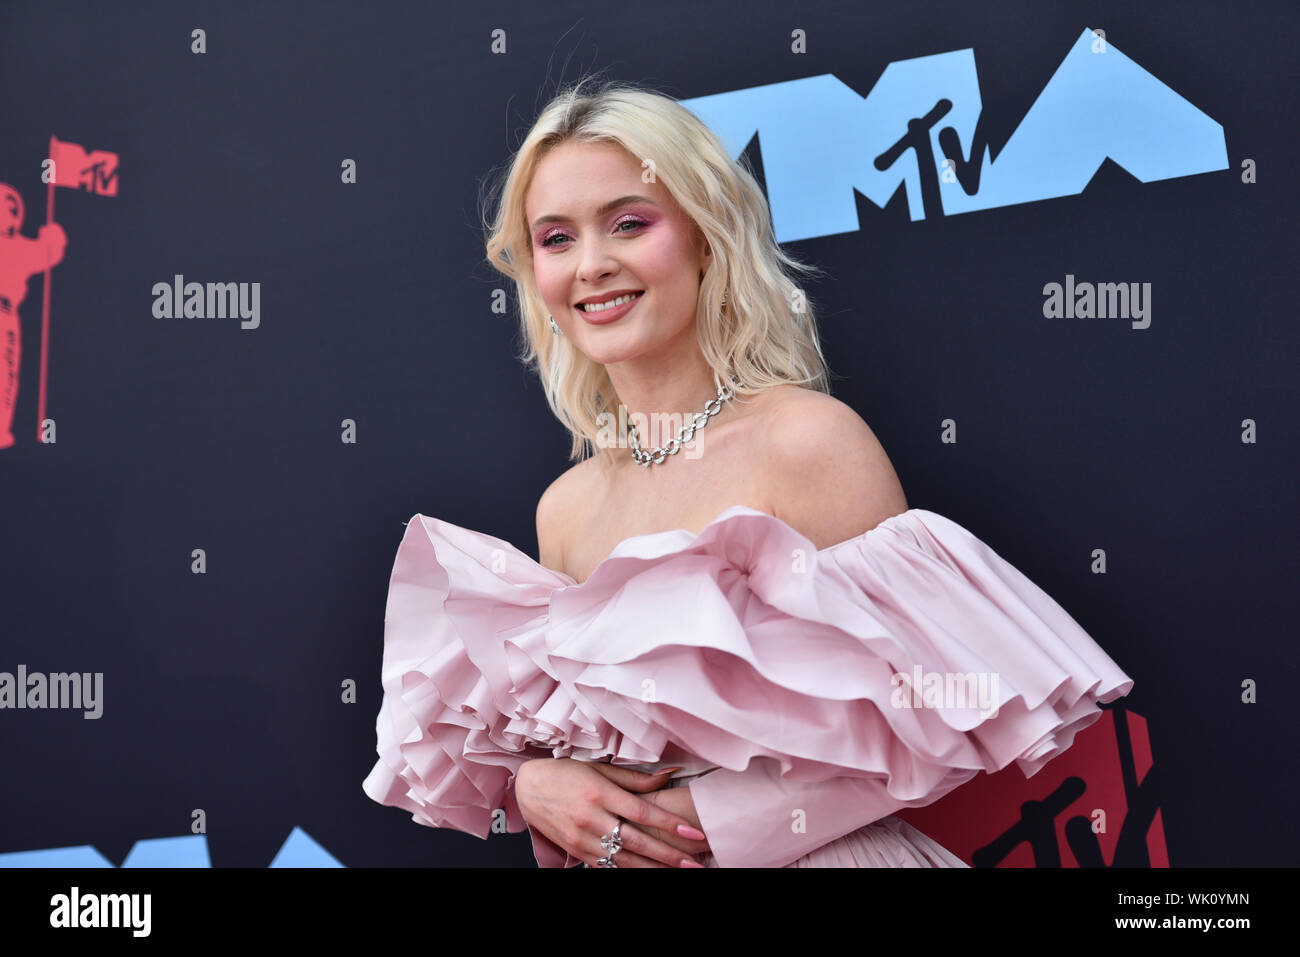 Zara Larsson attends the 2019 MTV Video Music Awards at Prudential Center on August 26, 2019 in Newark, New Jersey. Stock Photo